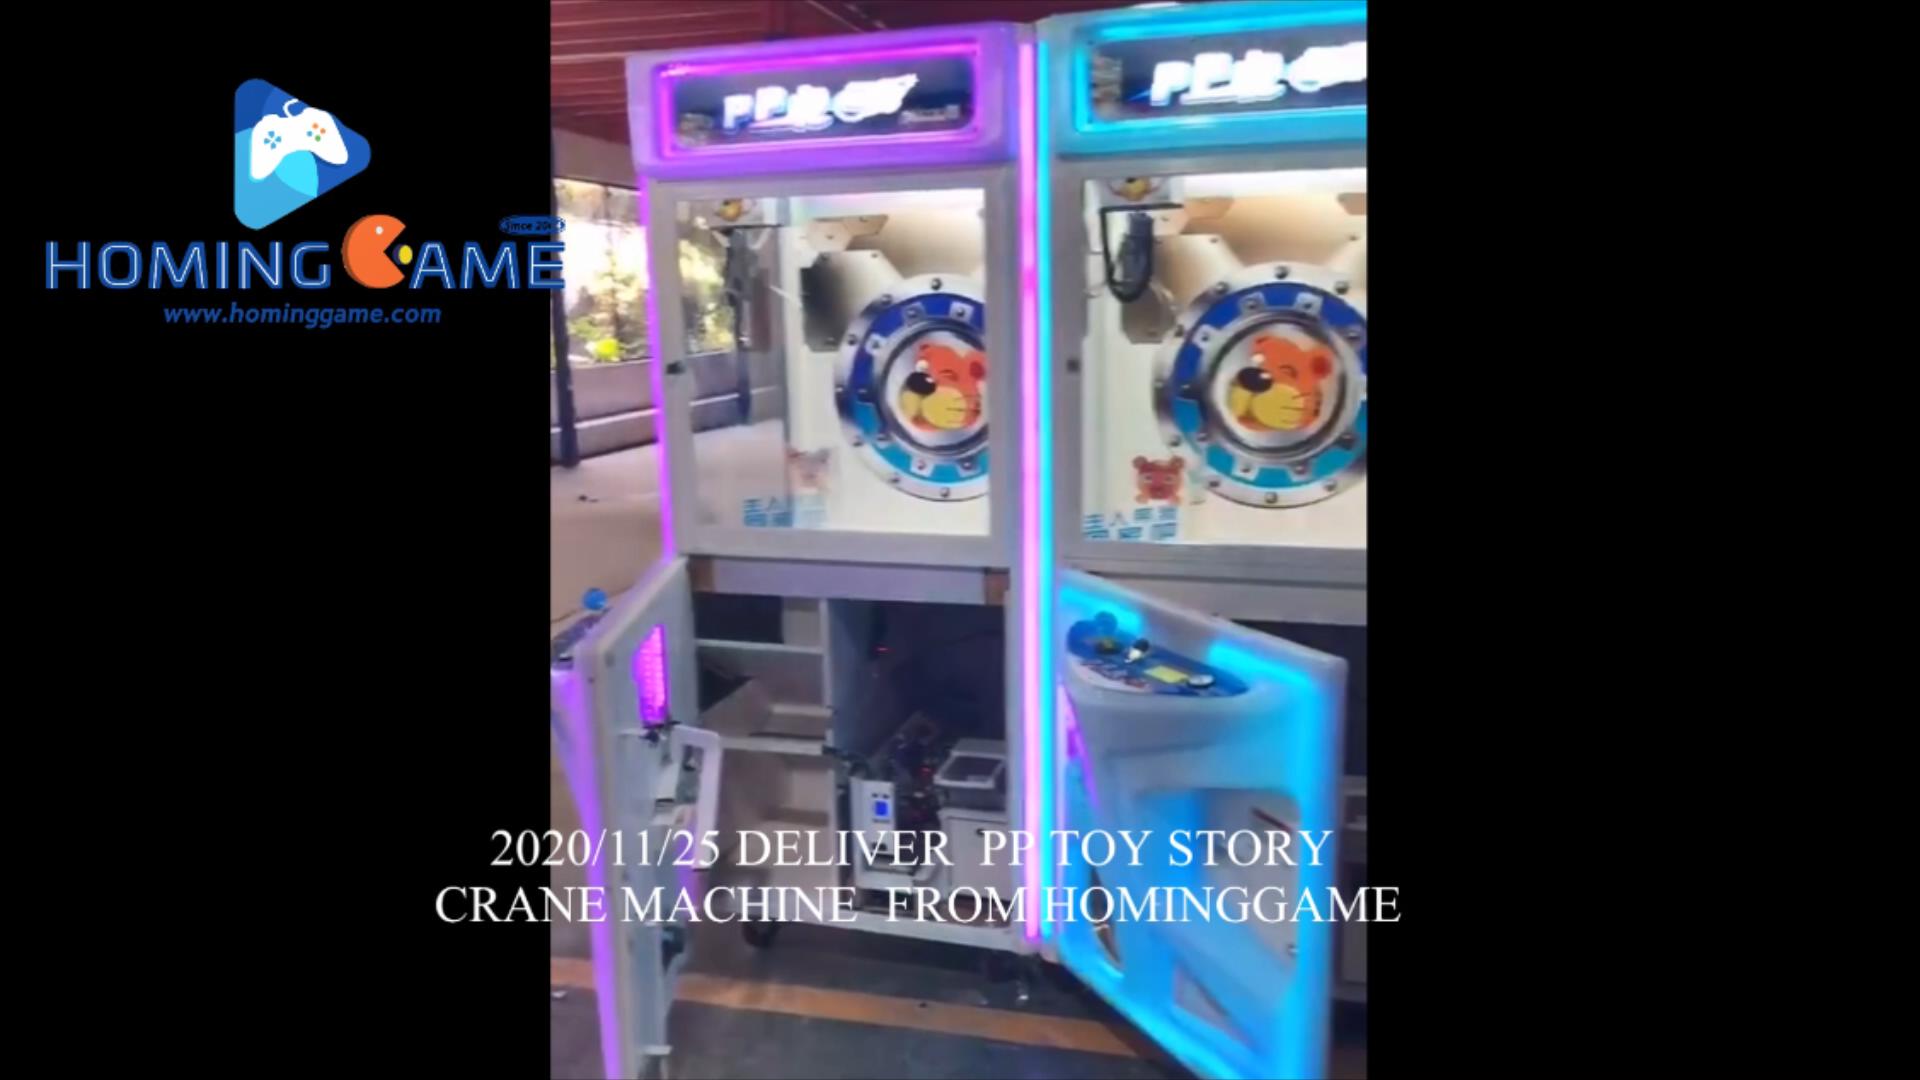 Deliver Hot Sale Coin Operated PP Toy Story Crane Machine To USA